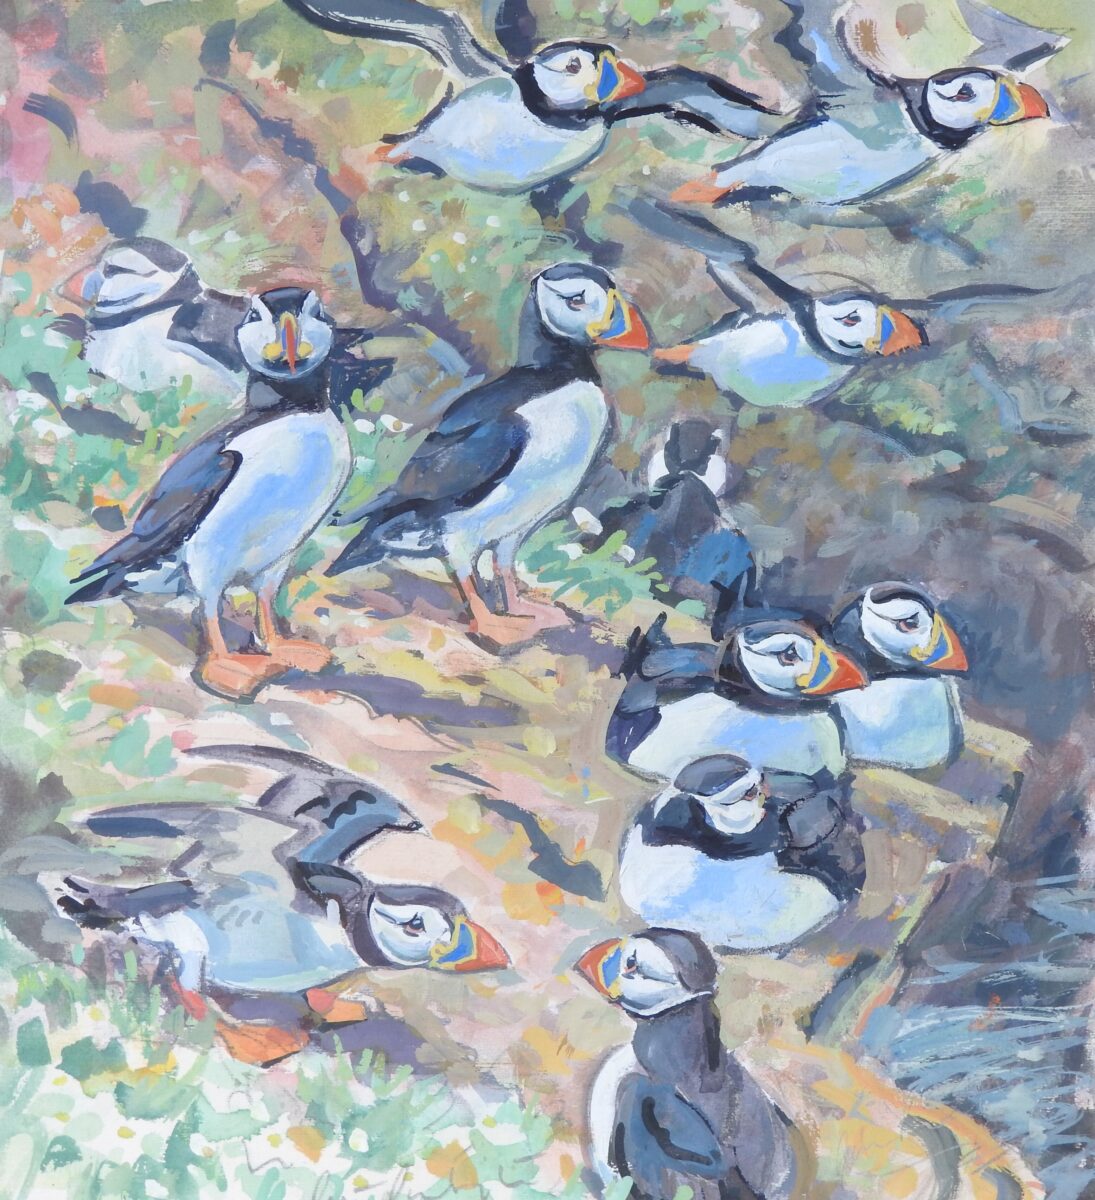 Artwork image titled: West Wales Puffins